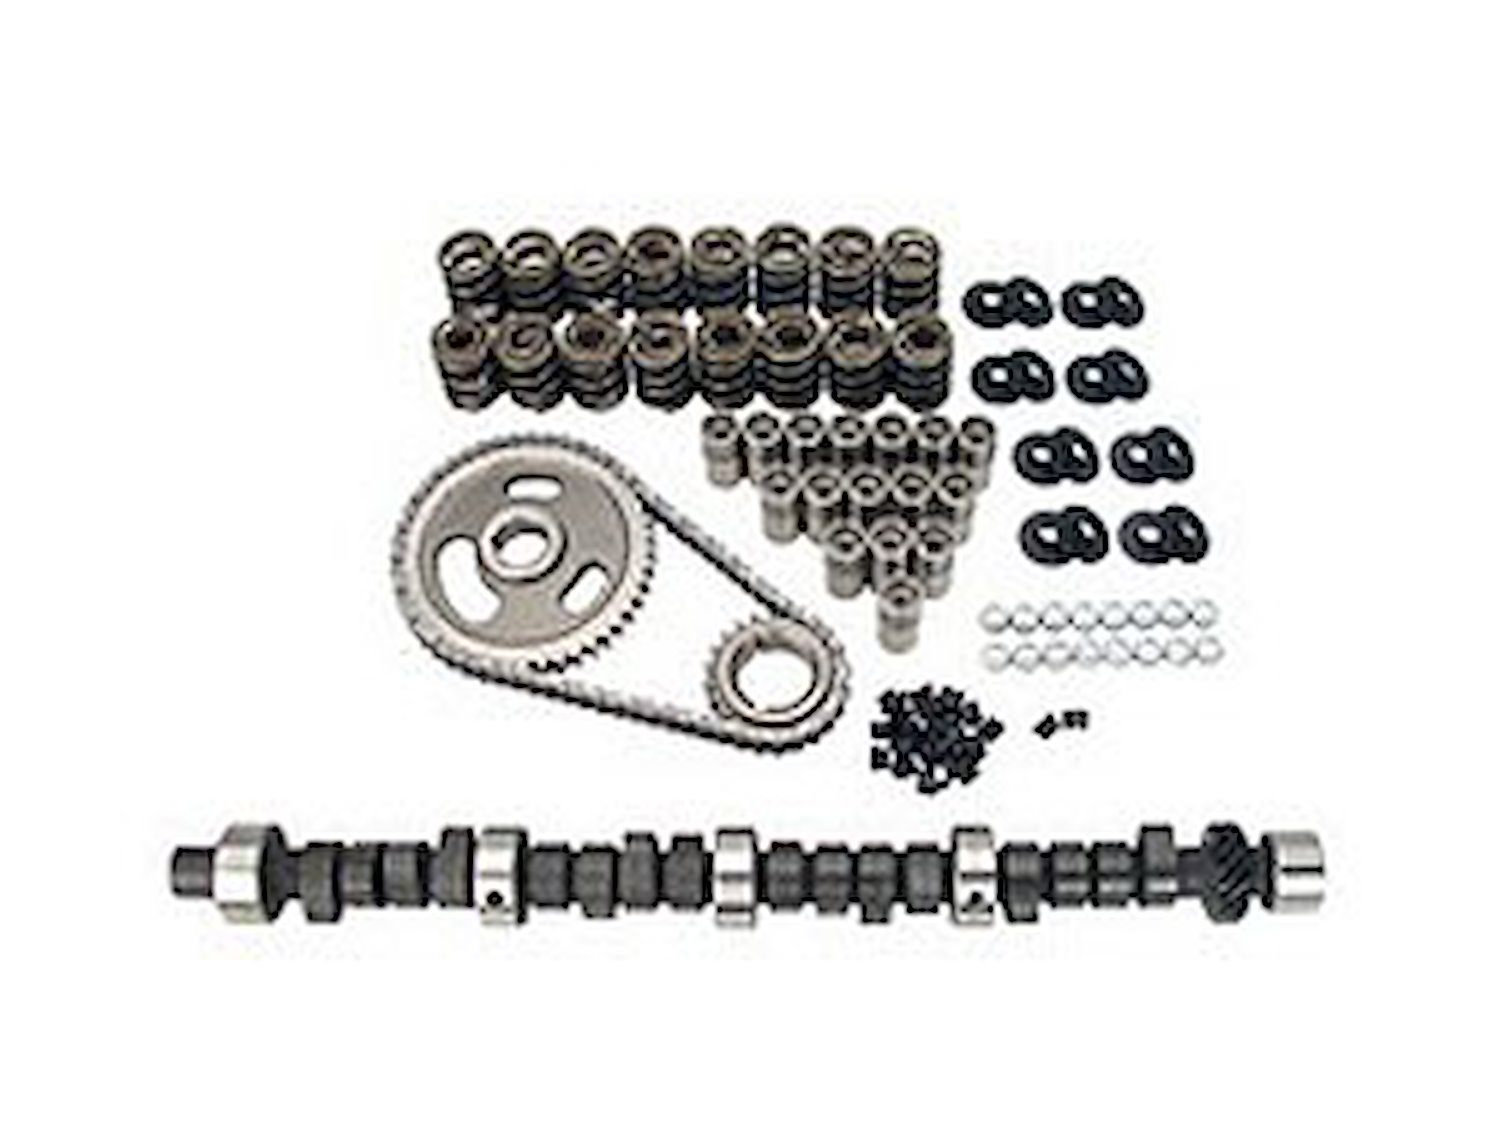 Xtreme Energy 274H Hydraulic Flat Tappet Camshaft Complete Kit Lift: .520"/.523" Duration: 274°/286° RPM Range: 2000-6000